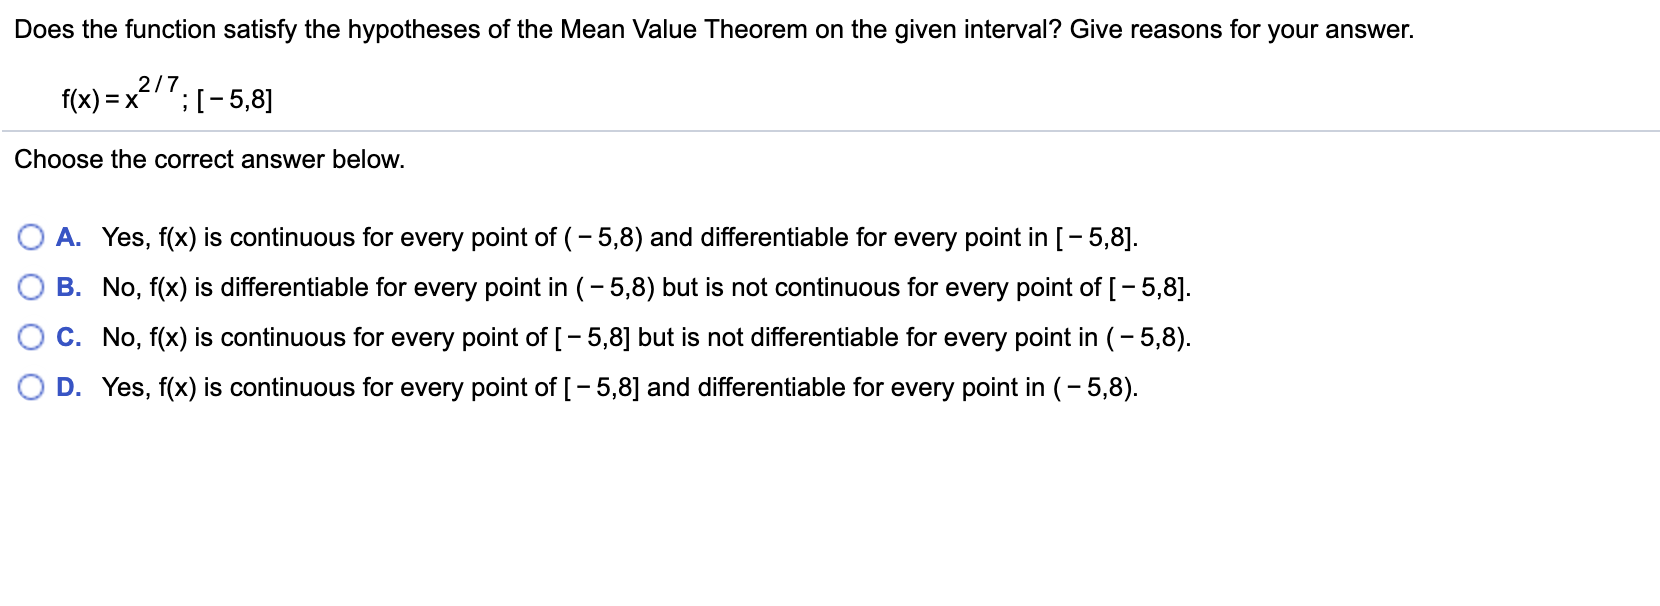 Does the function satisfy the hypotheses of the Mean Value Theorem on the given interval? Give reasons for your answer.
2/7
E X
;I-5,8]
f(x)
Choose the correct answer below.
A. Yes, f(x) is continuous for every point of (-5,8) and differentiable for every point in [-5,8
B. No, f(x) is differentiable for every point in (-5,8) but is not continuous for every point of [-5,8]
C. No, f(x) is continuous for every point of [- 5,8] but is not differentiable for every point in (- 5,8)
D. Yes, f(x) is continuous for every point of [-5,8] and differentiable for every point in (-5,8)
